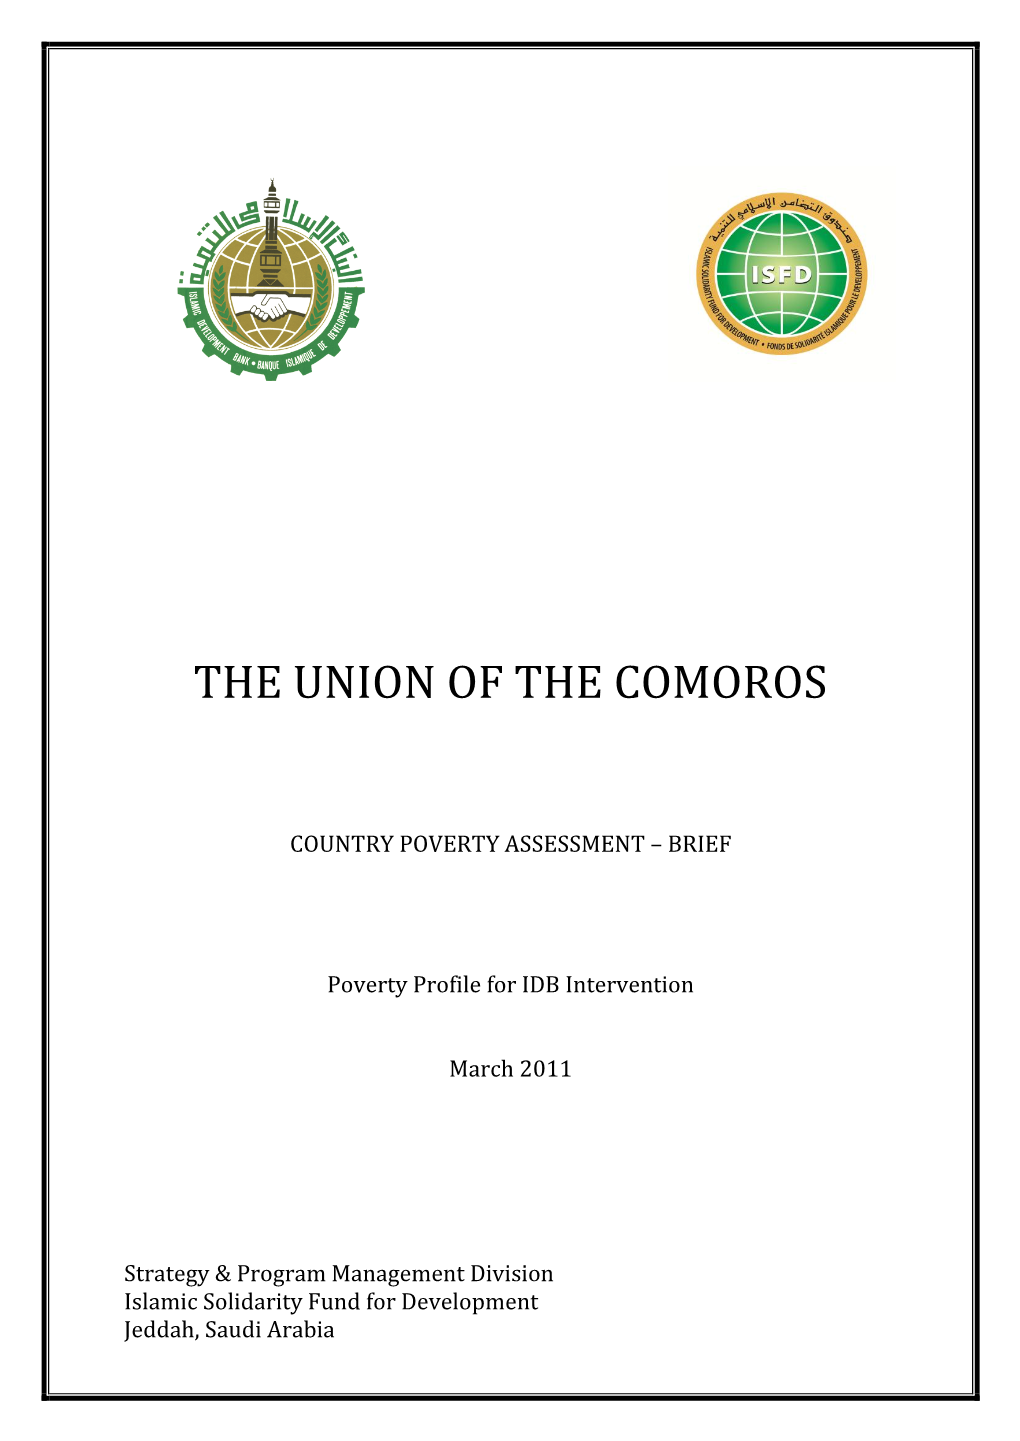 The Union of the Comoros